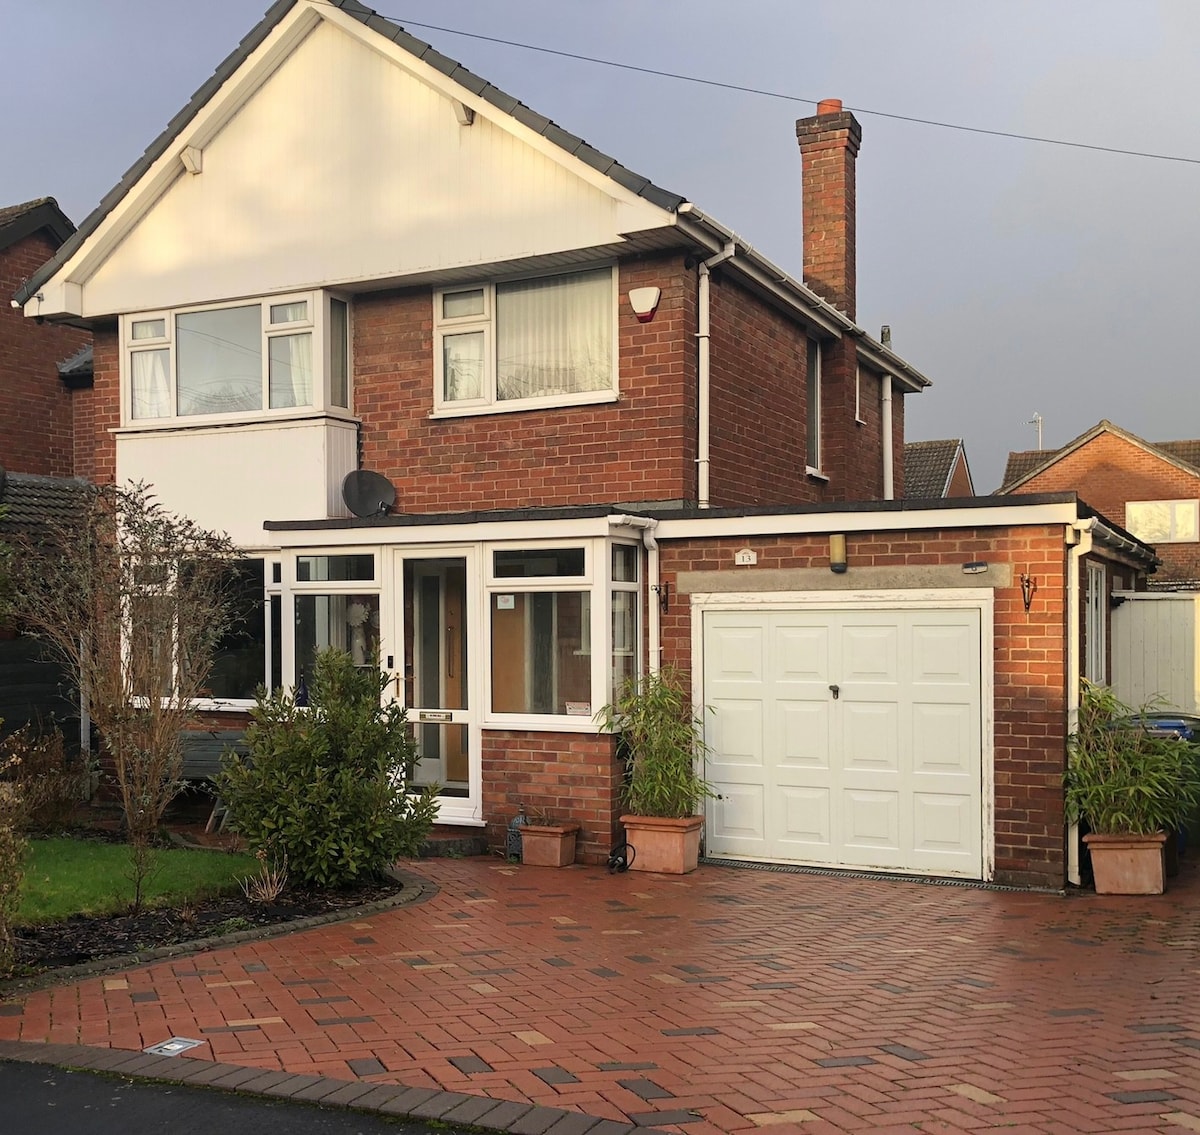 3 Bed House - Prime Location in Bramhall